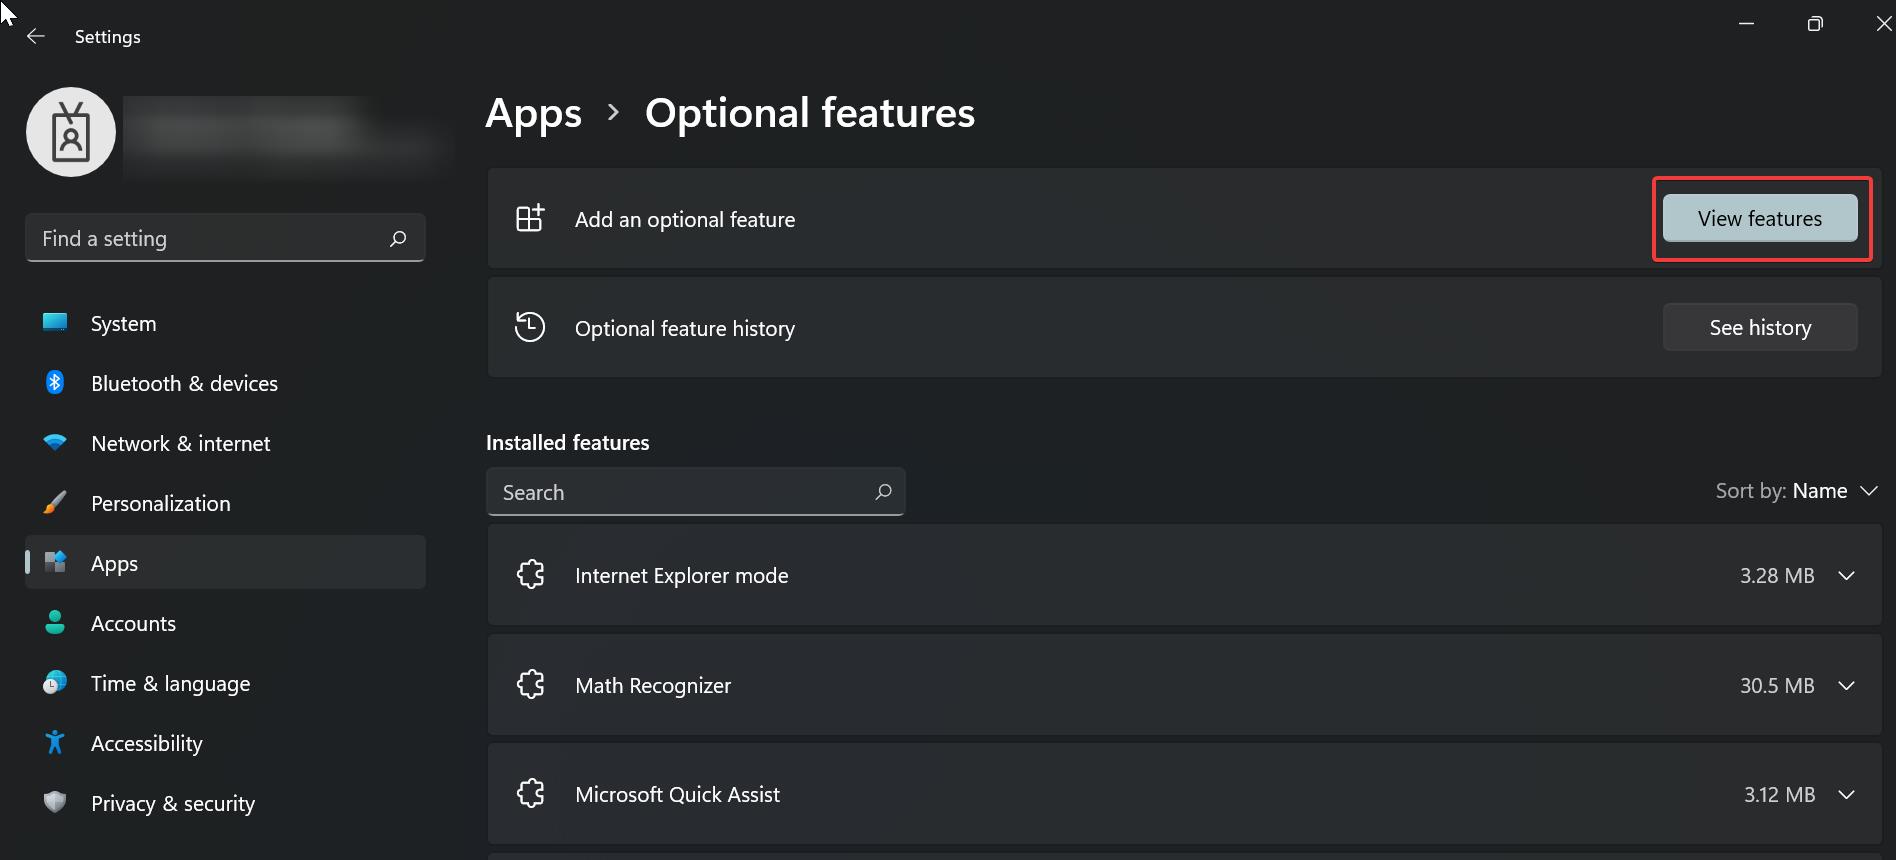 Optional features View features